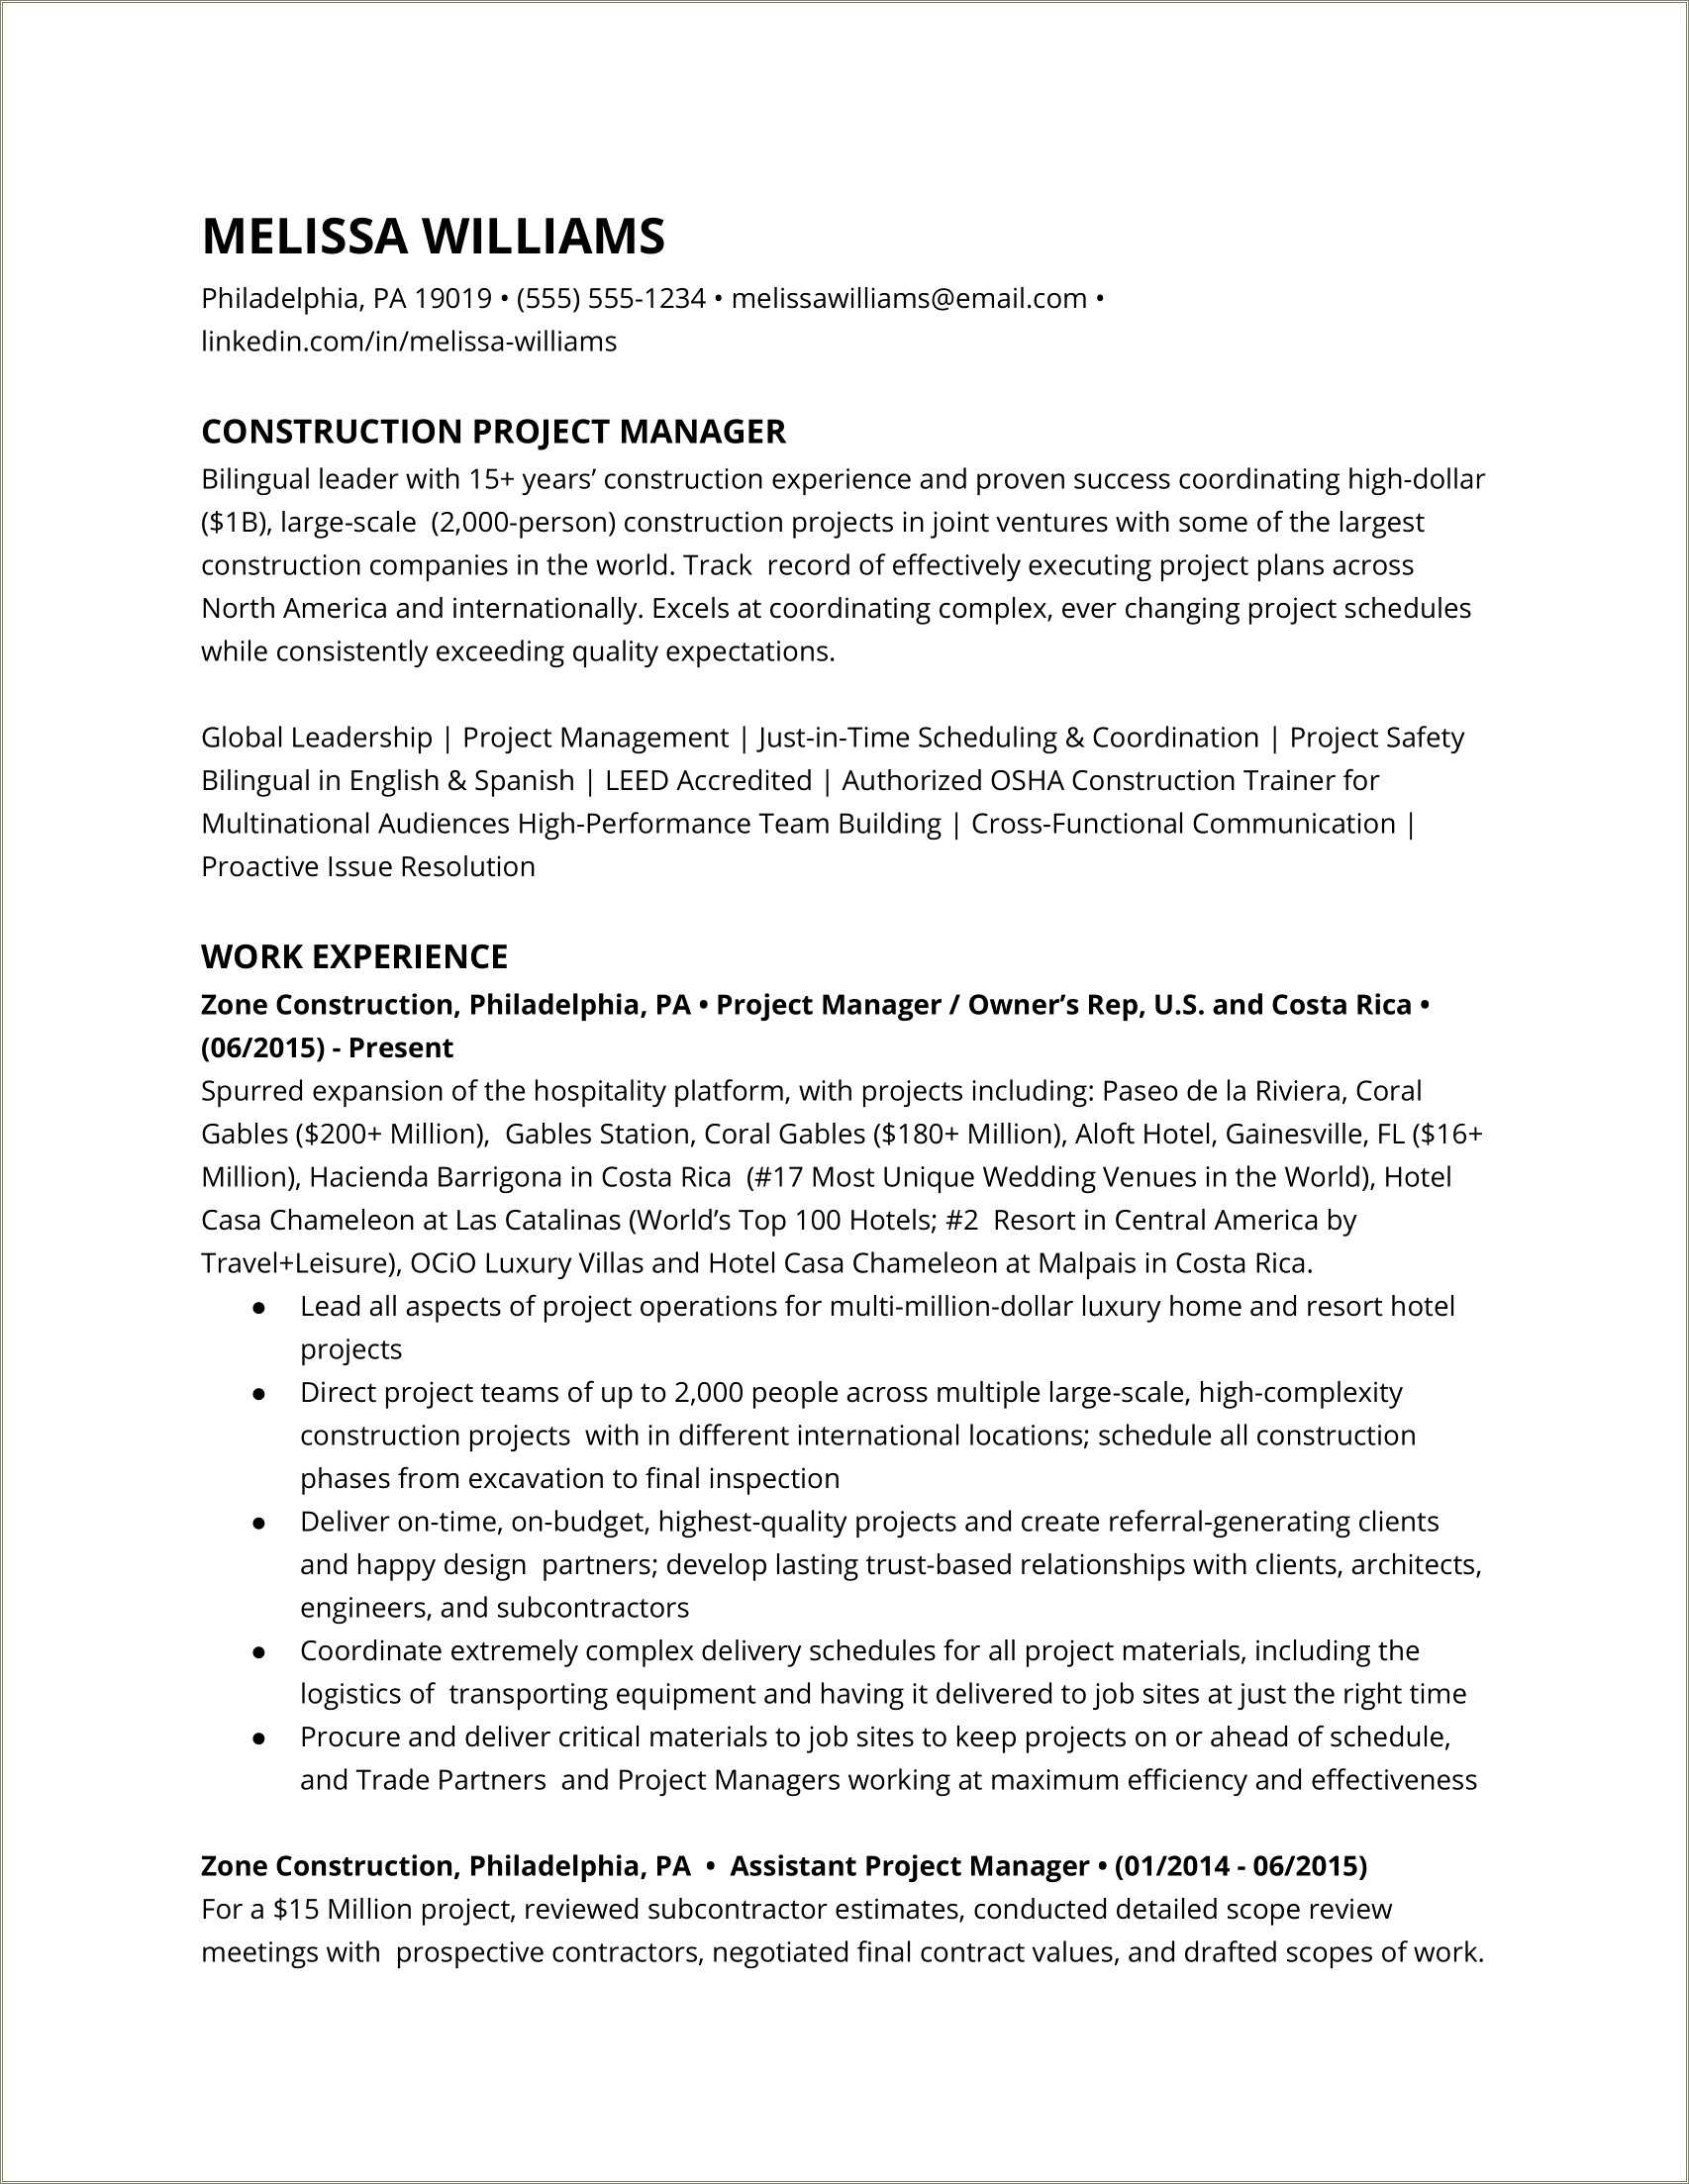 experienced project manager resume examples